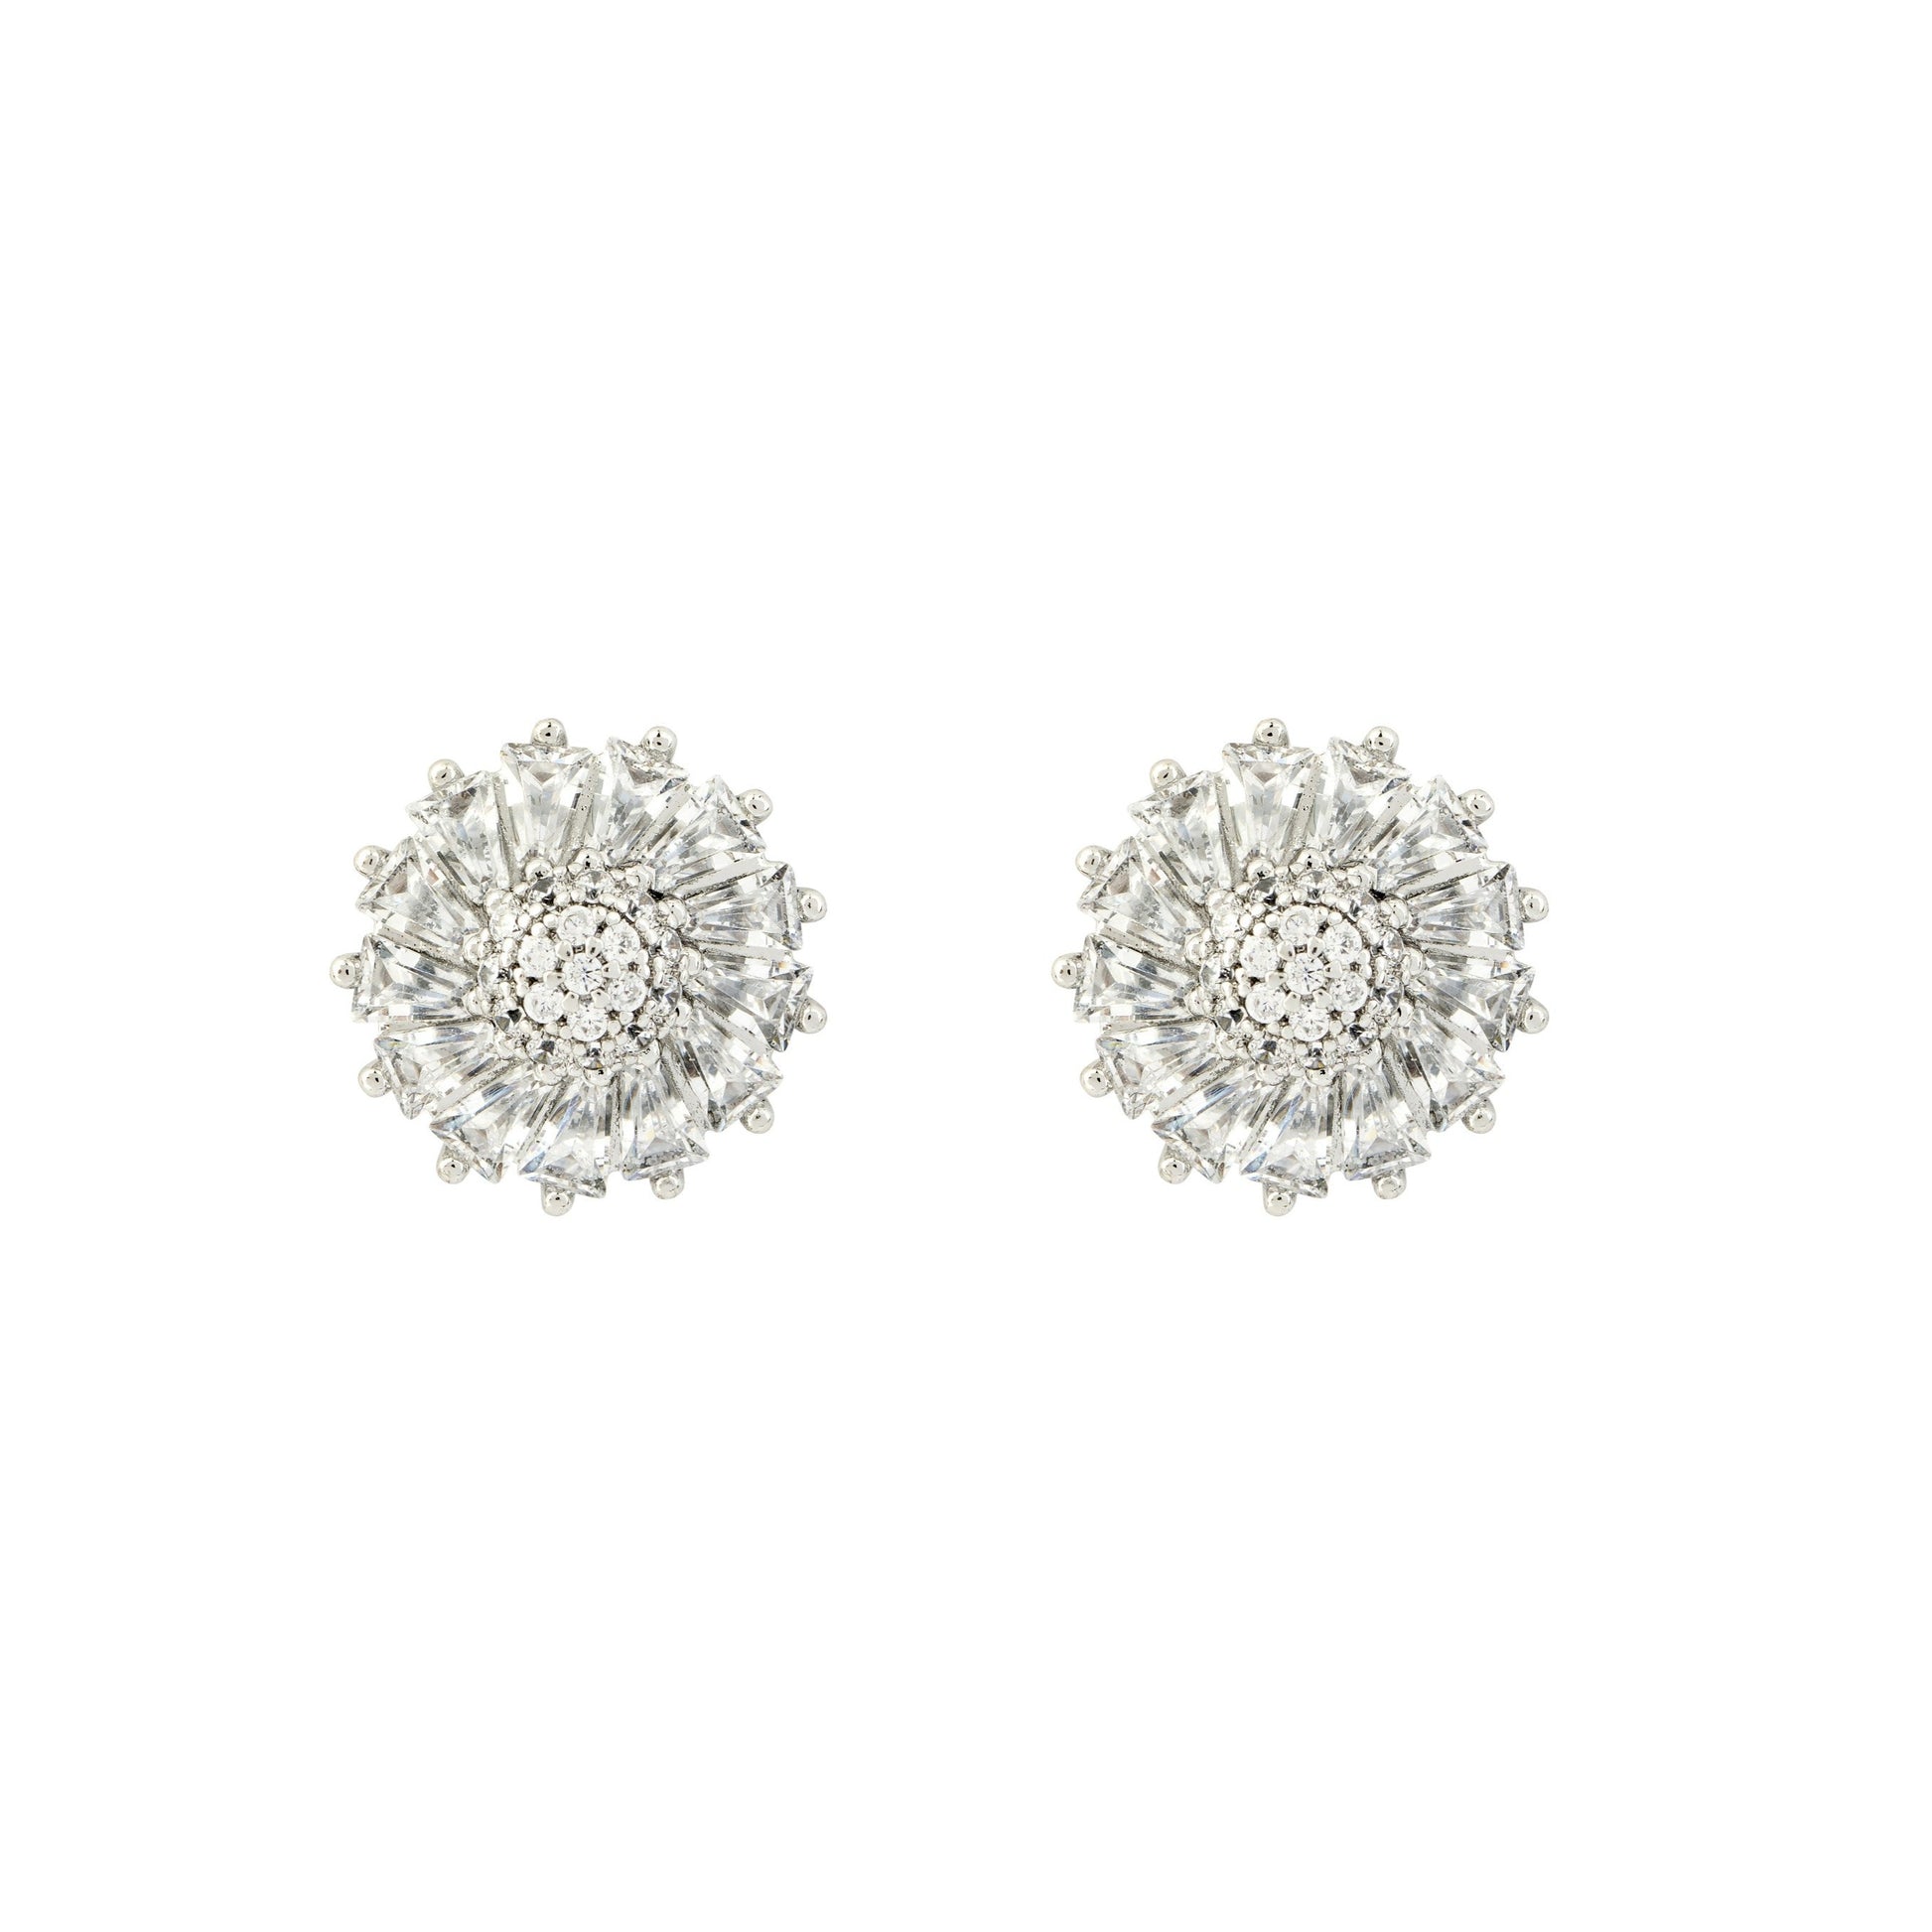 Sparkling Crystal and Rhodium Studs - Love & Lilly Jewellery